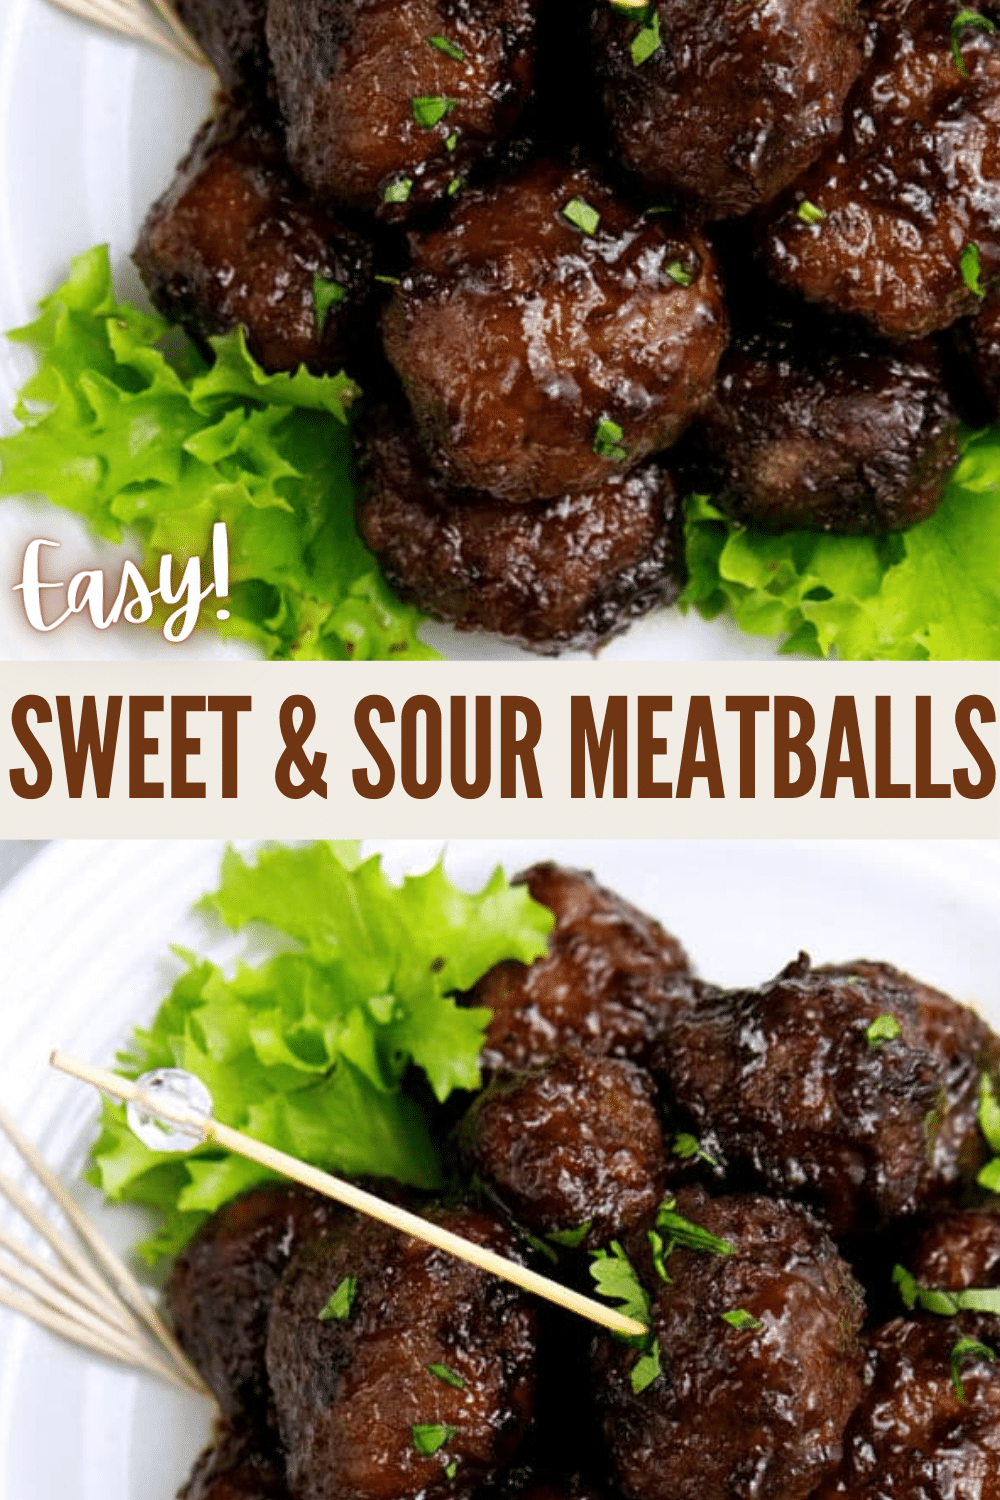 A super easy appetizer recipe for sweet & sour meatballs. You just need a few ingredients and a crockpot! They make great finger foods for a party. #appetizers #fingerfoods #meatballs via @wondermomwannab